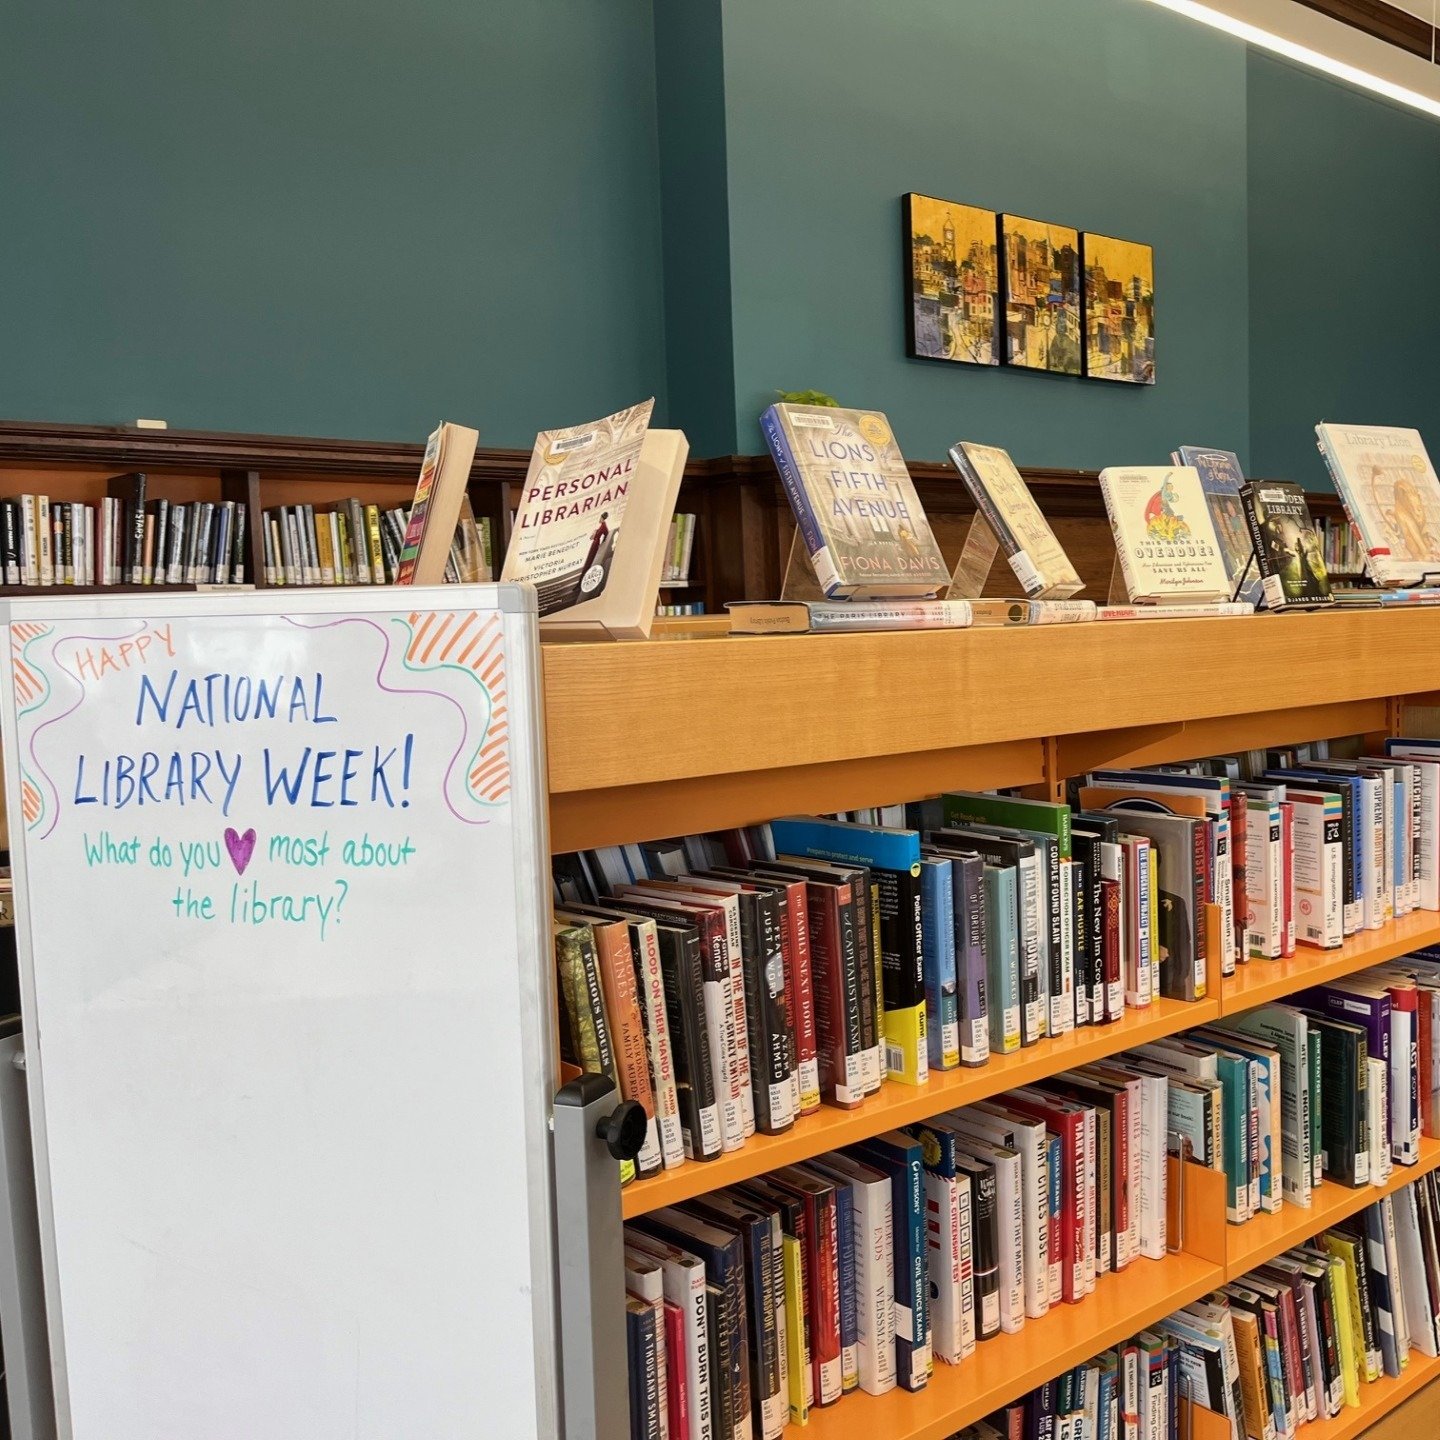 It's #nationallibraryweek! Stop by the @bpljamaicaplain to check out library themed books and share what you love most about our library. #bpl #bostonpubliclibrary #jamaicaplain #jp